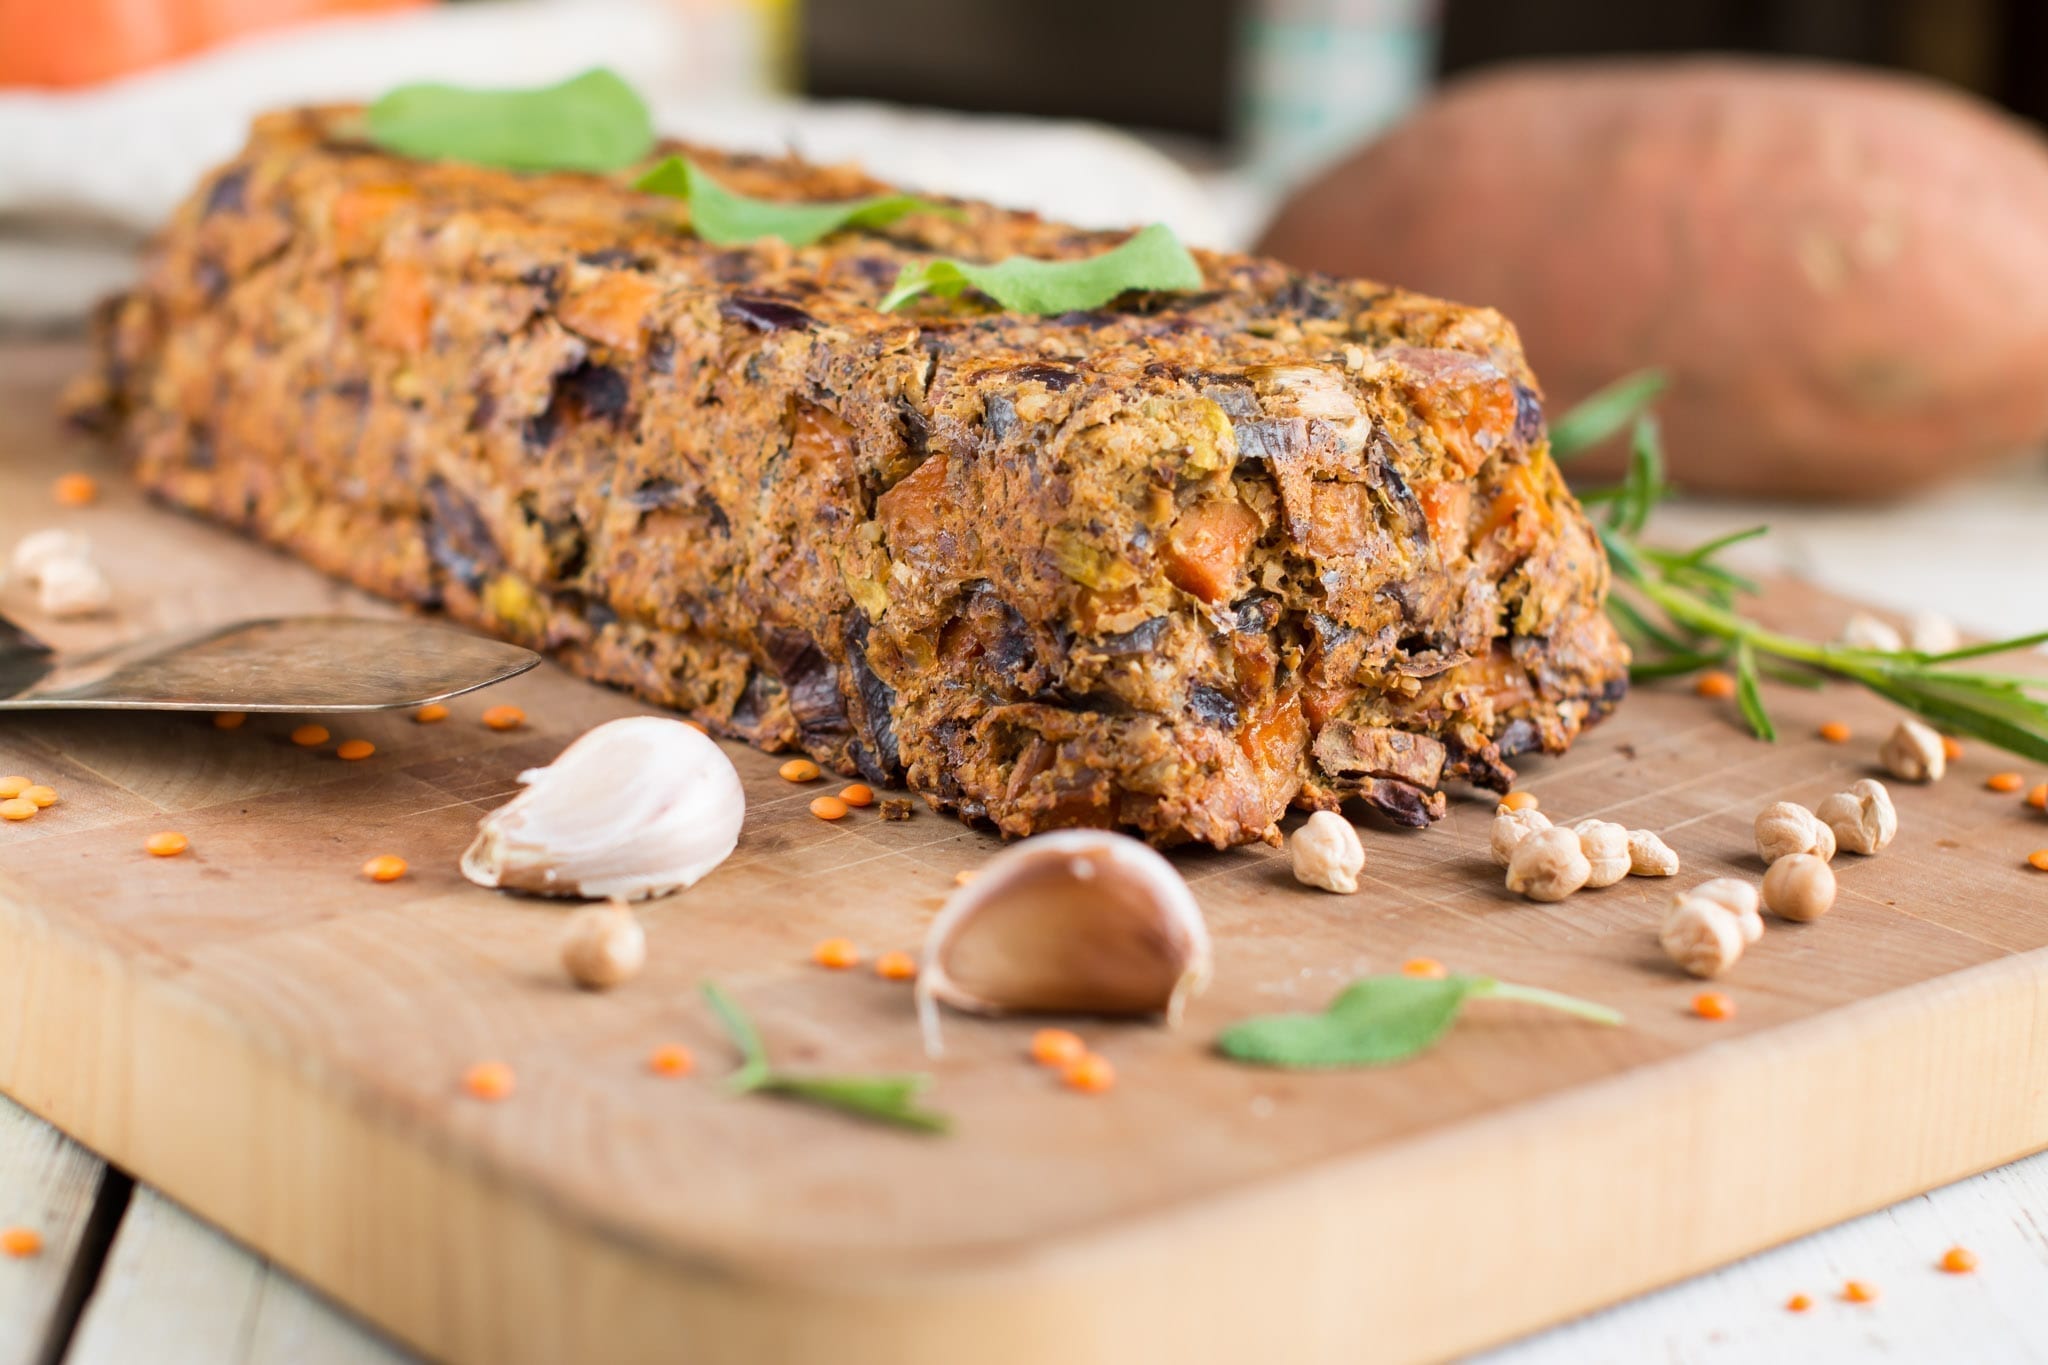 Lentil loaf with potatoes and nuts